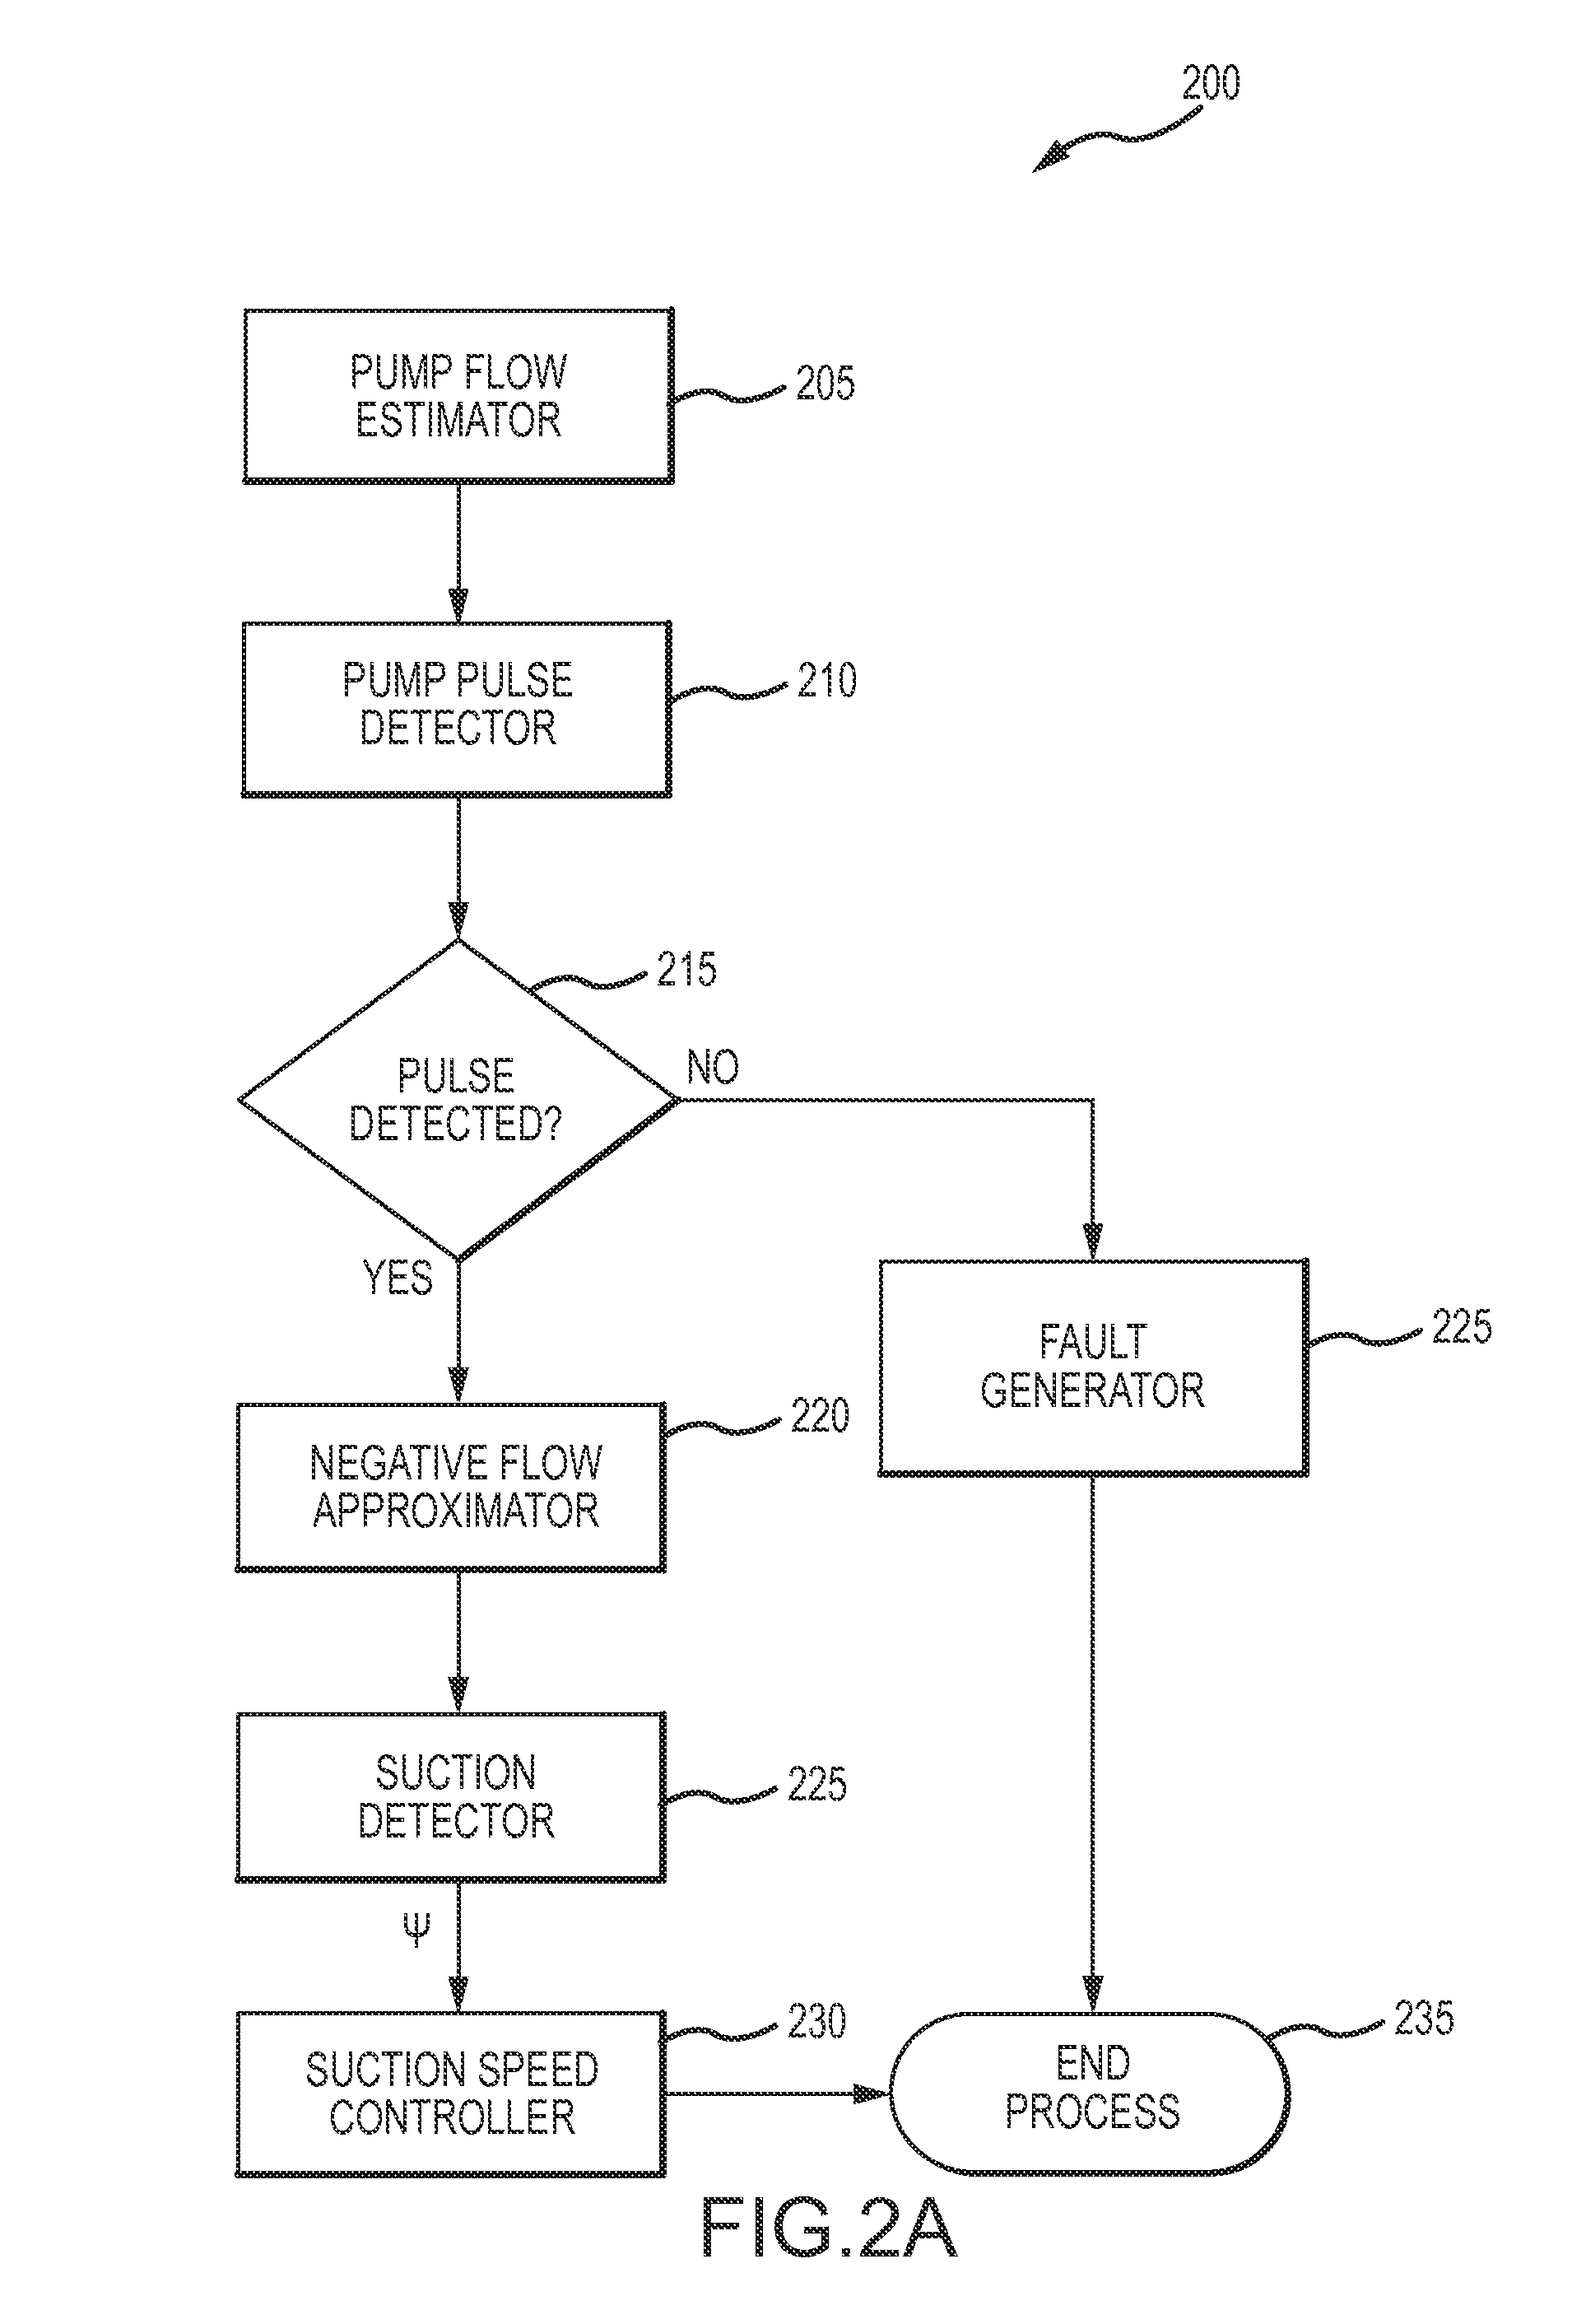 Blood pump and method of suction detection